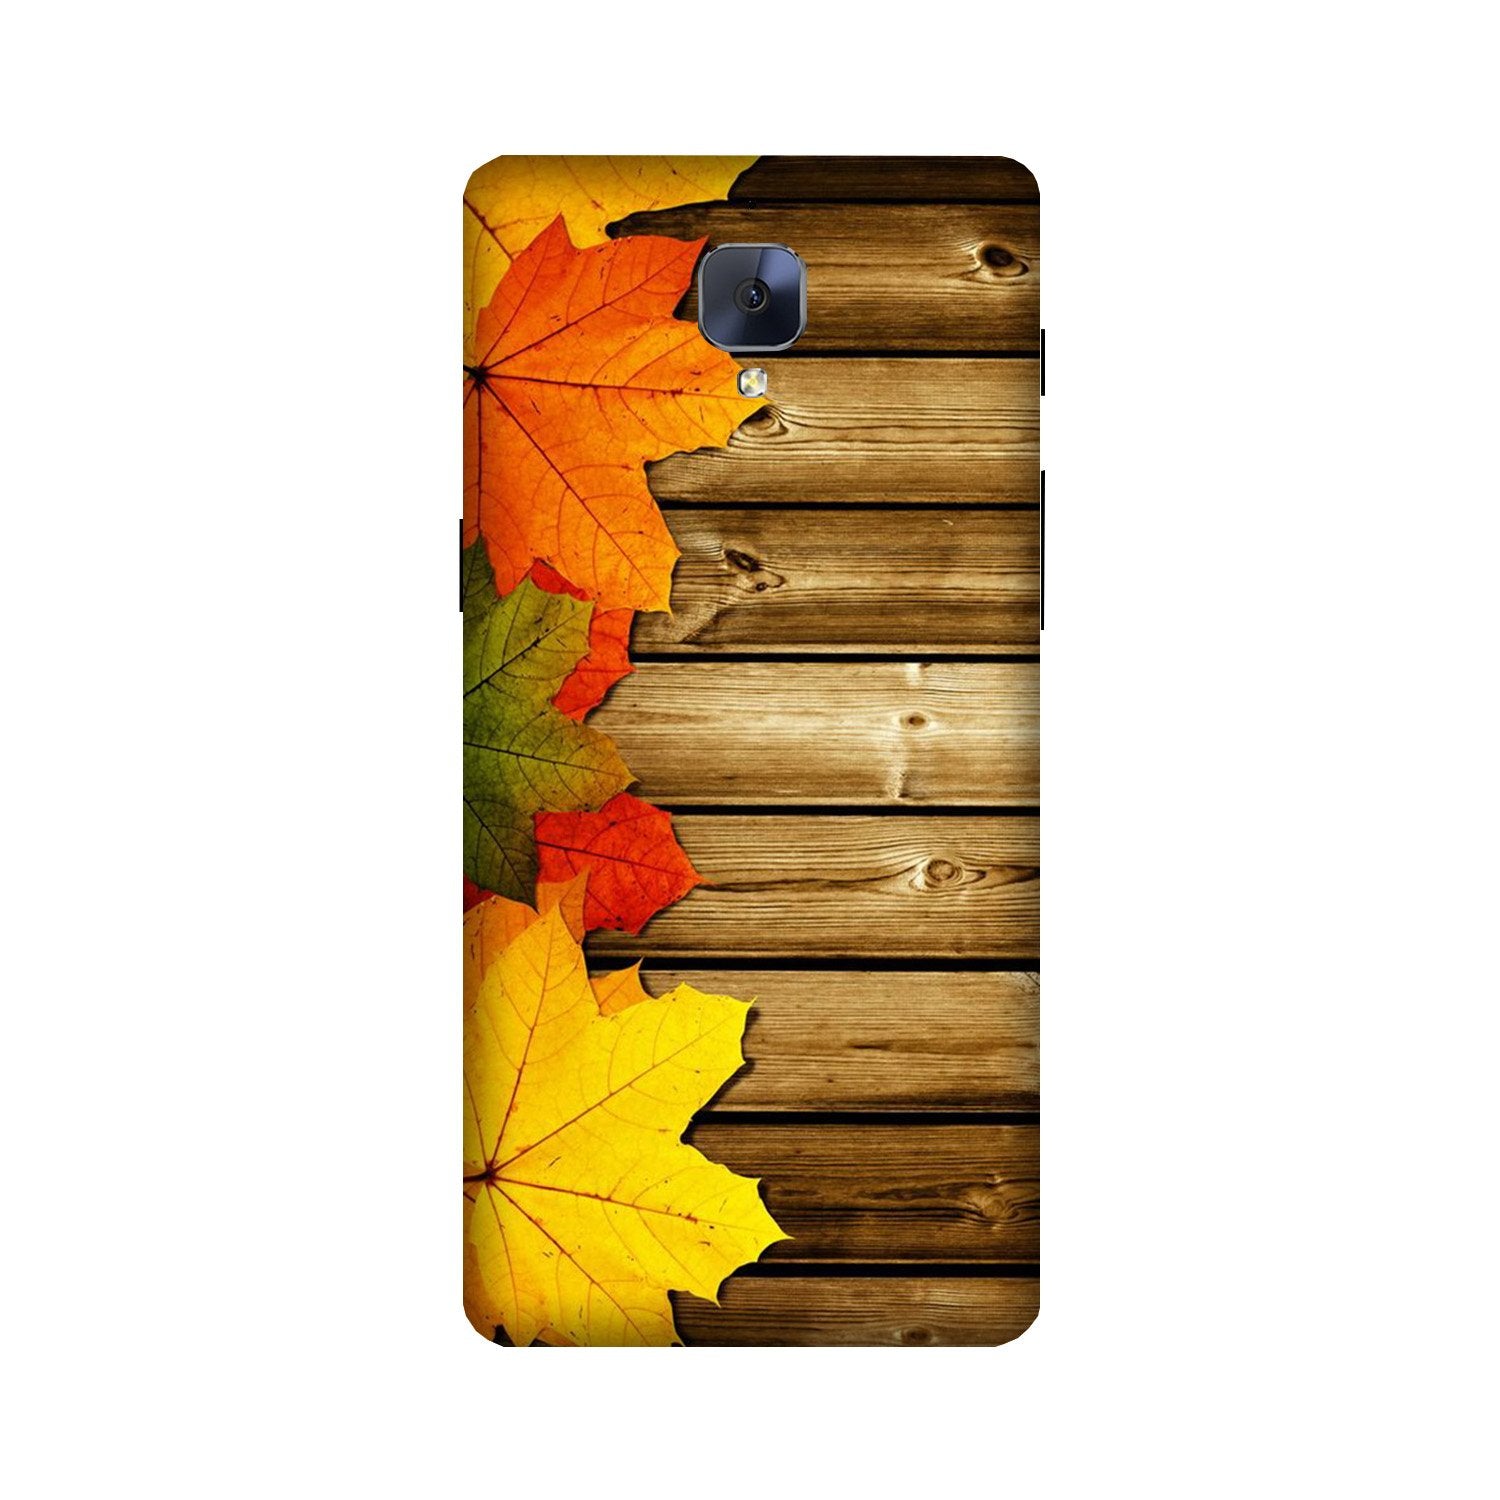 Wooden look3 Case for OnePlus 3/ 3T